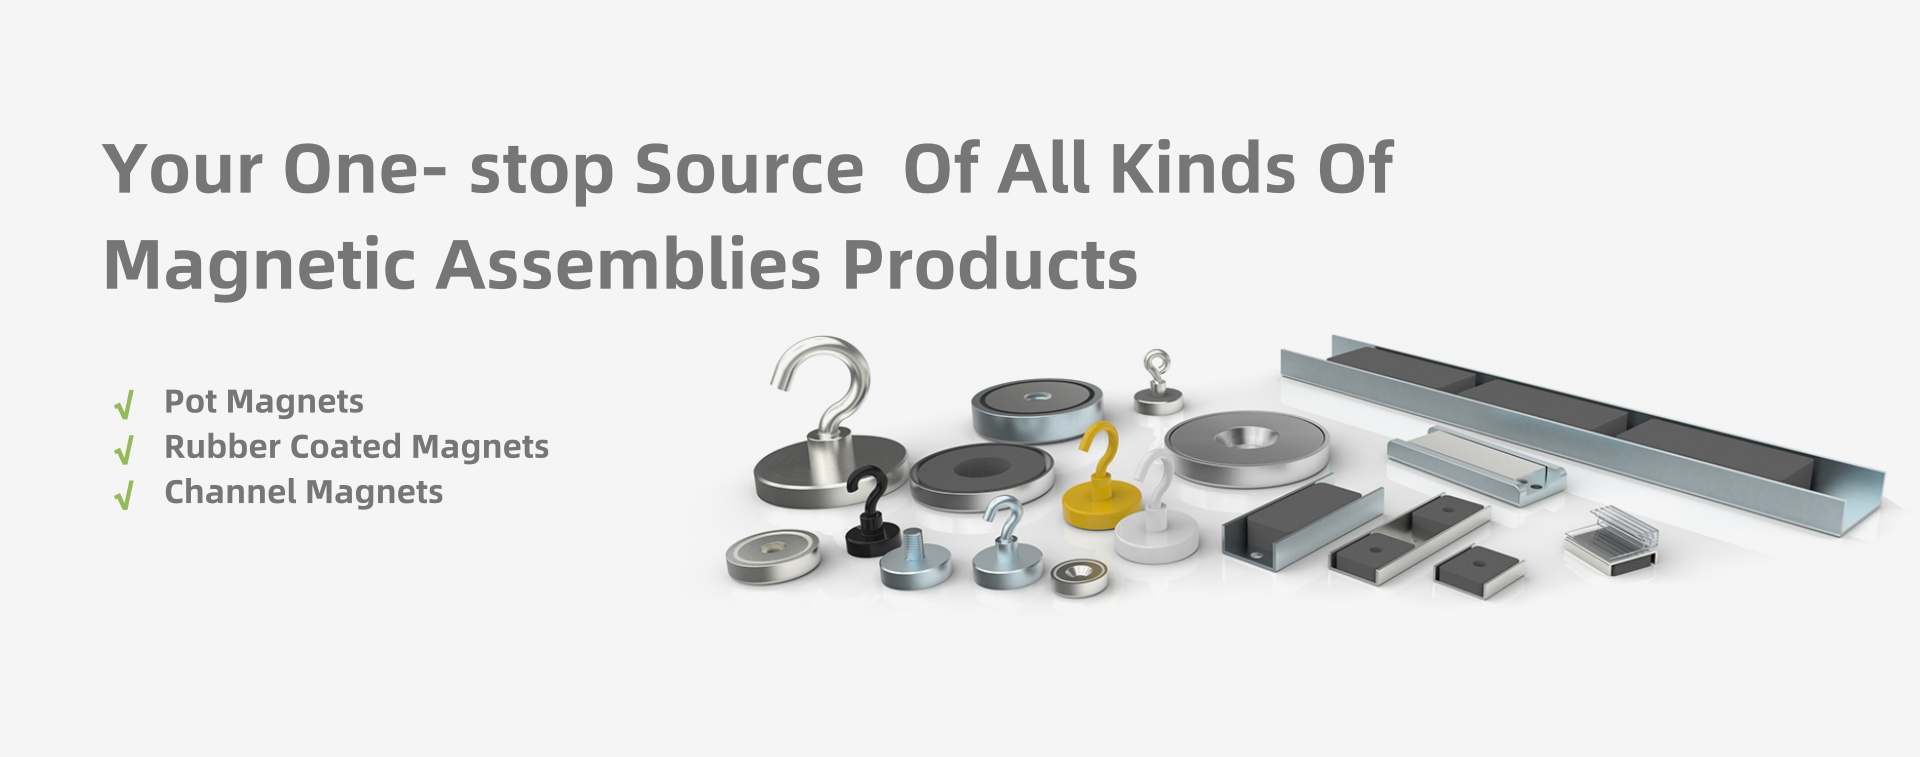 Your One-Stop Source Of All Kinds Of Magnetic Assemblies Products